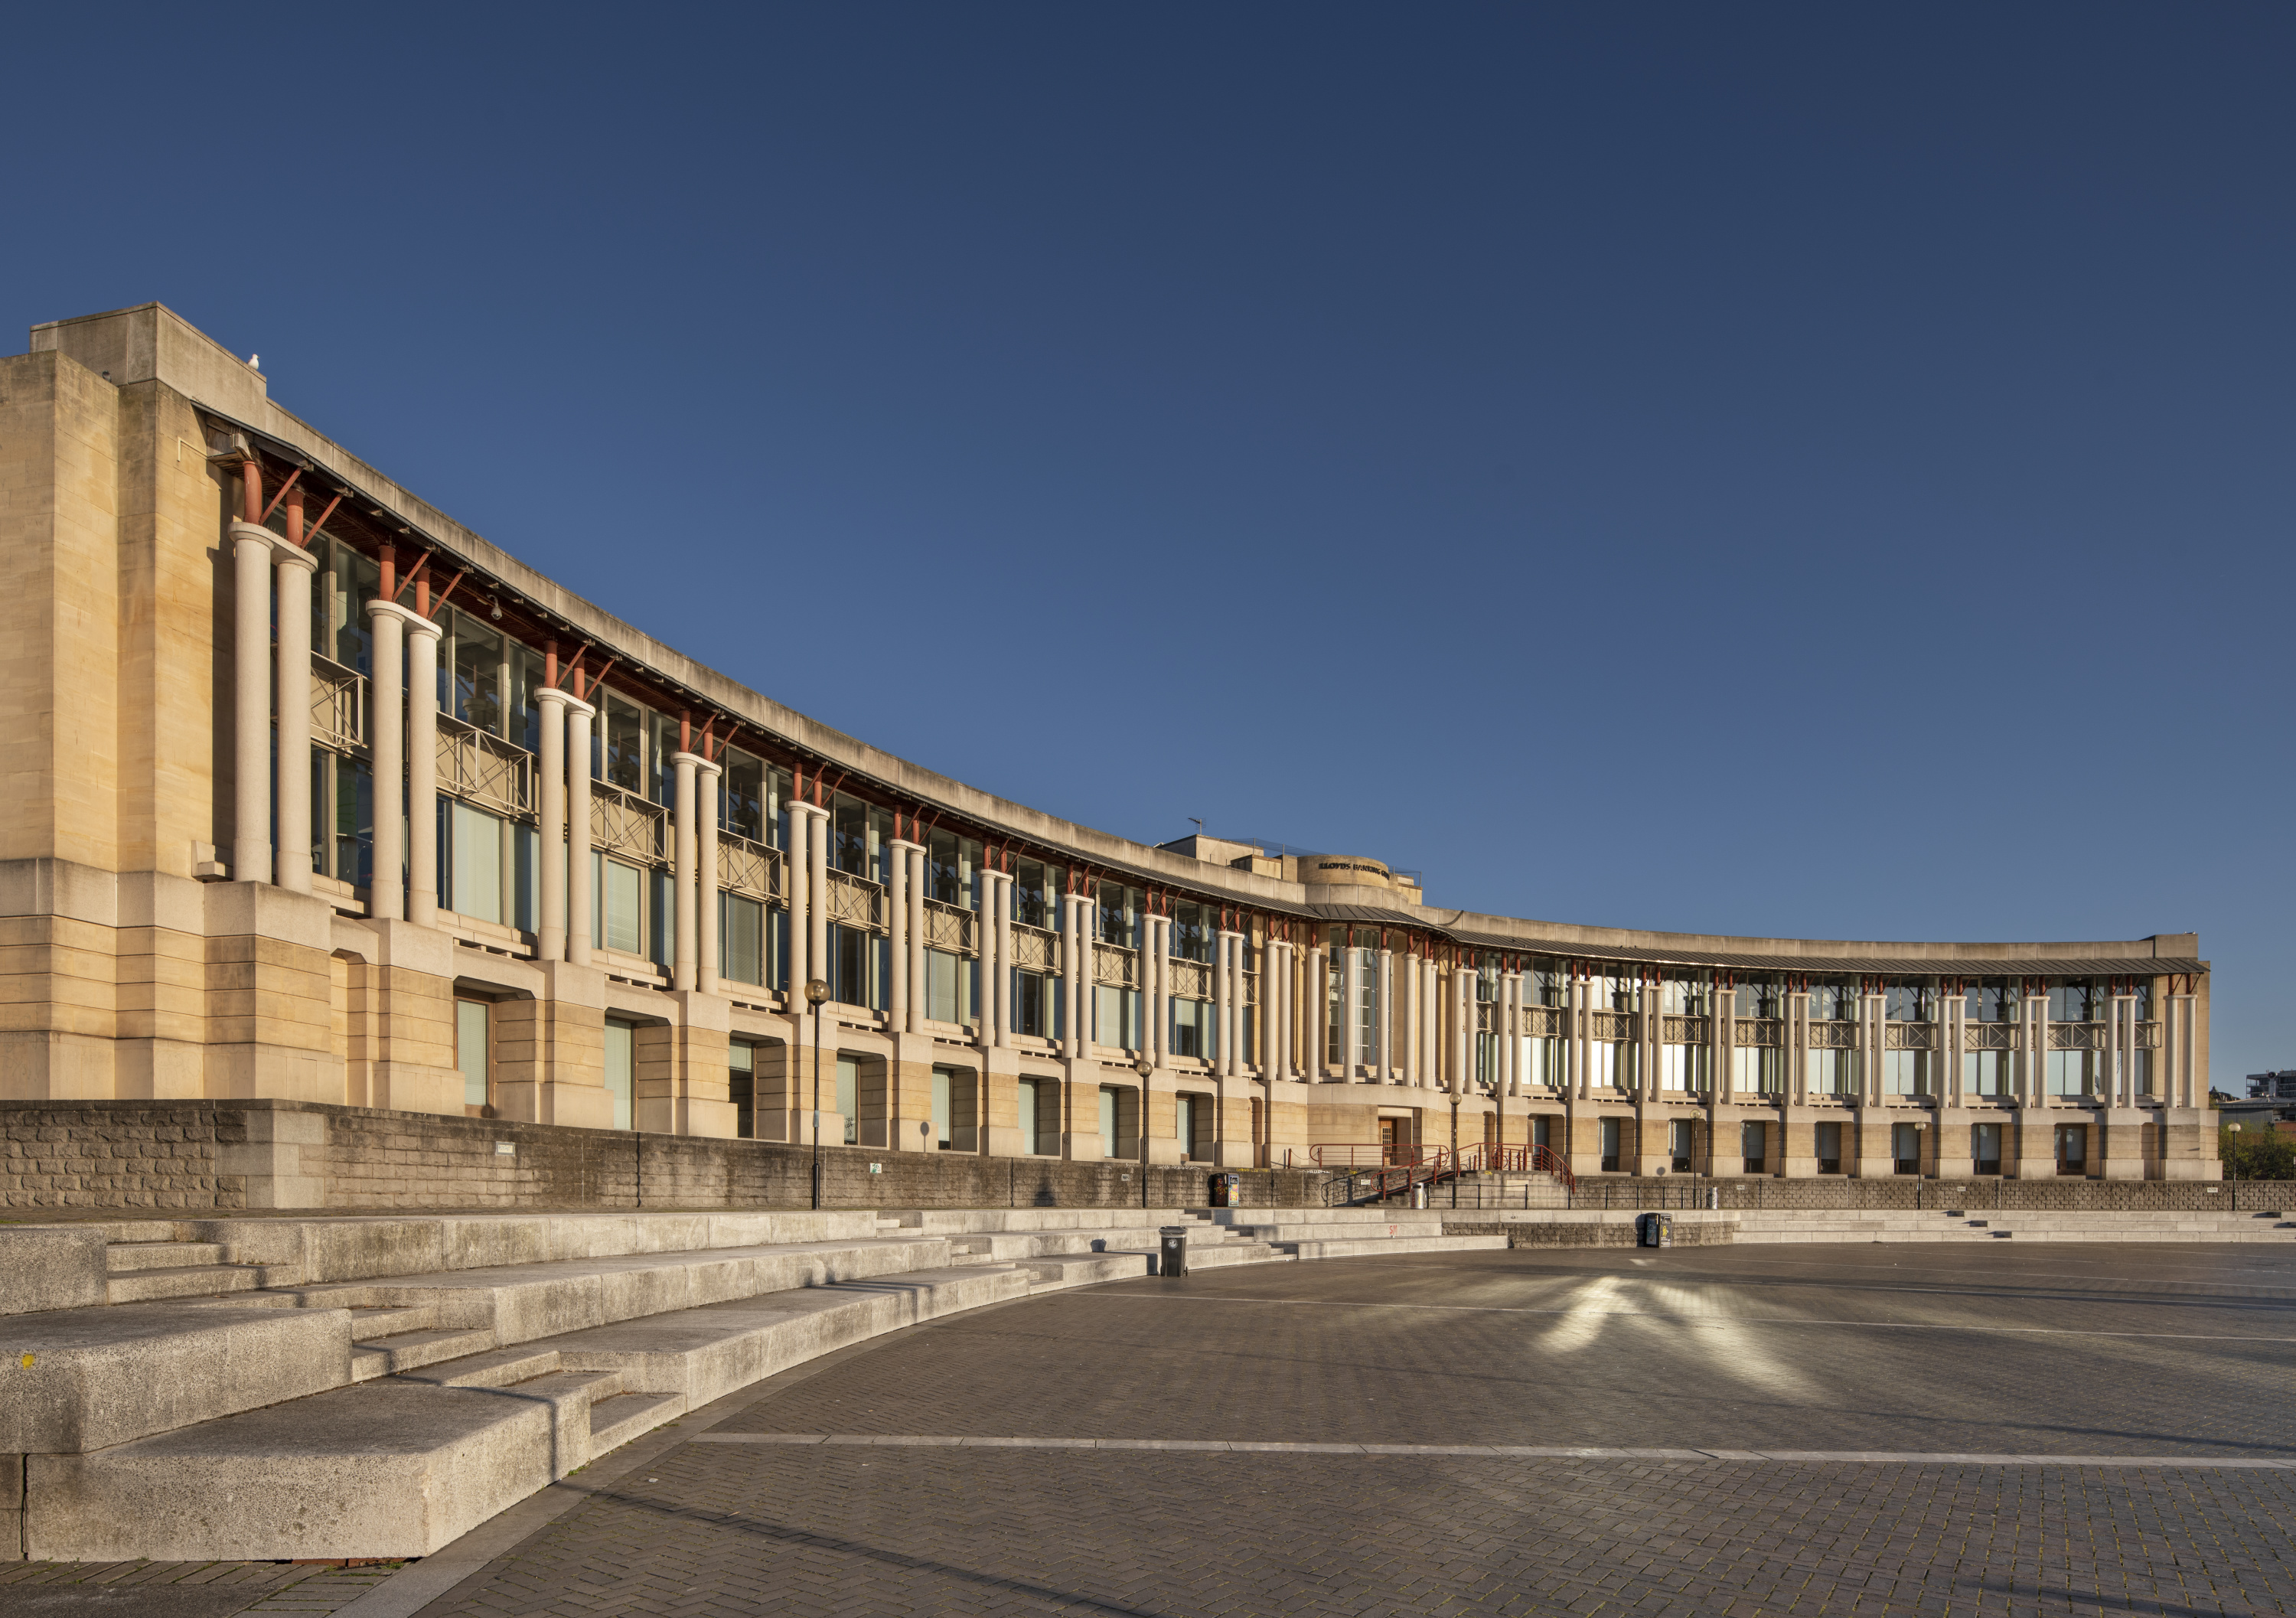 A grand, modern building with a curved frontage and colonnade overlooks a paved public space